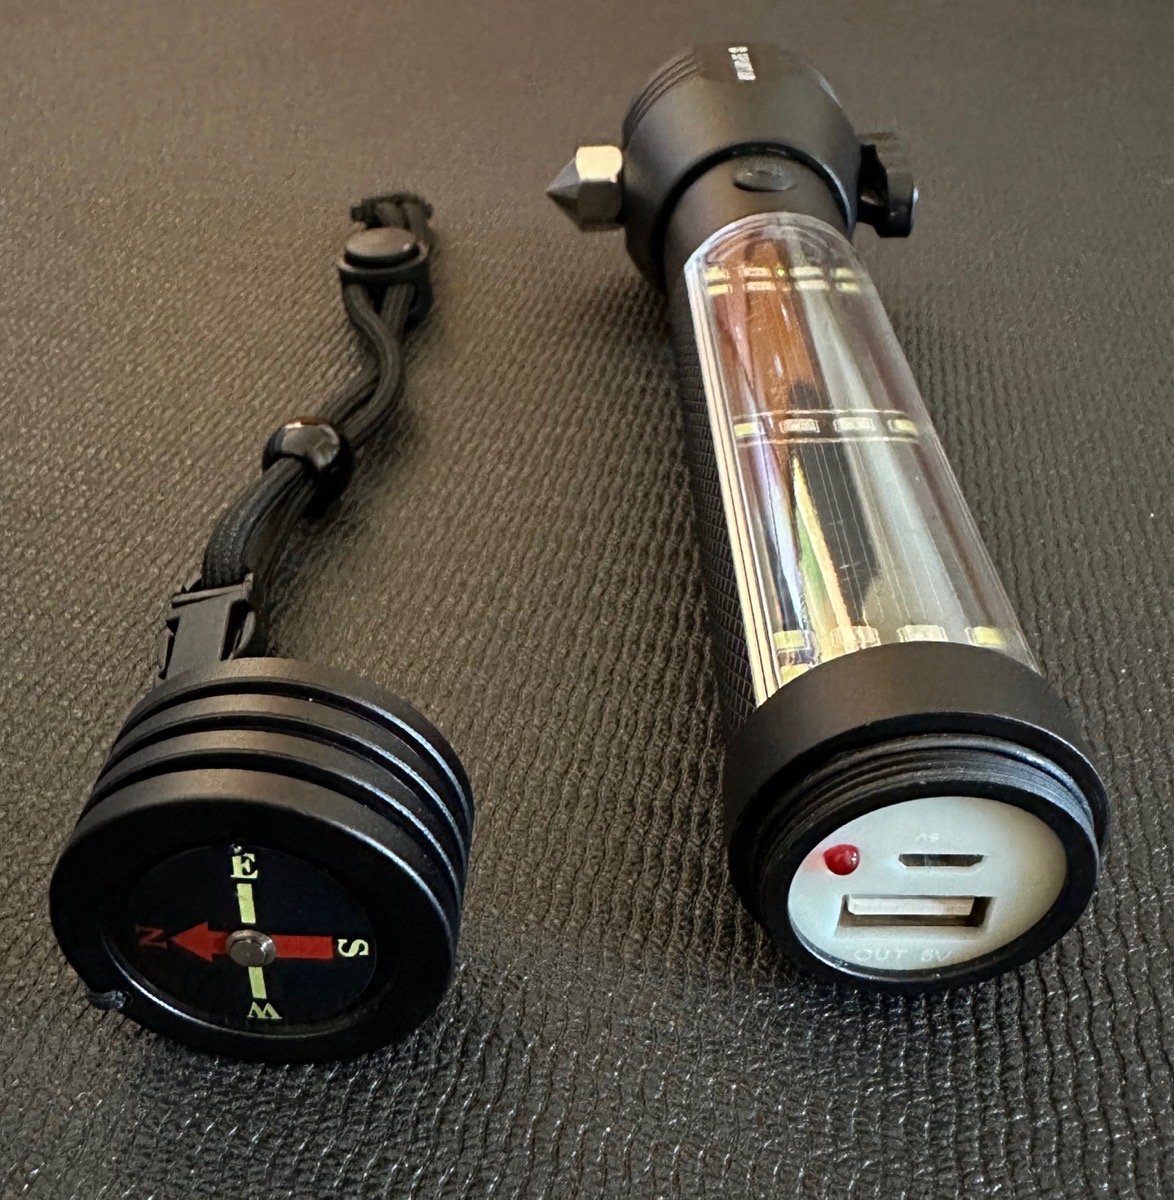 Spurtar Flashlight Showing Compass and charging Ports